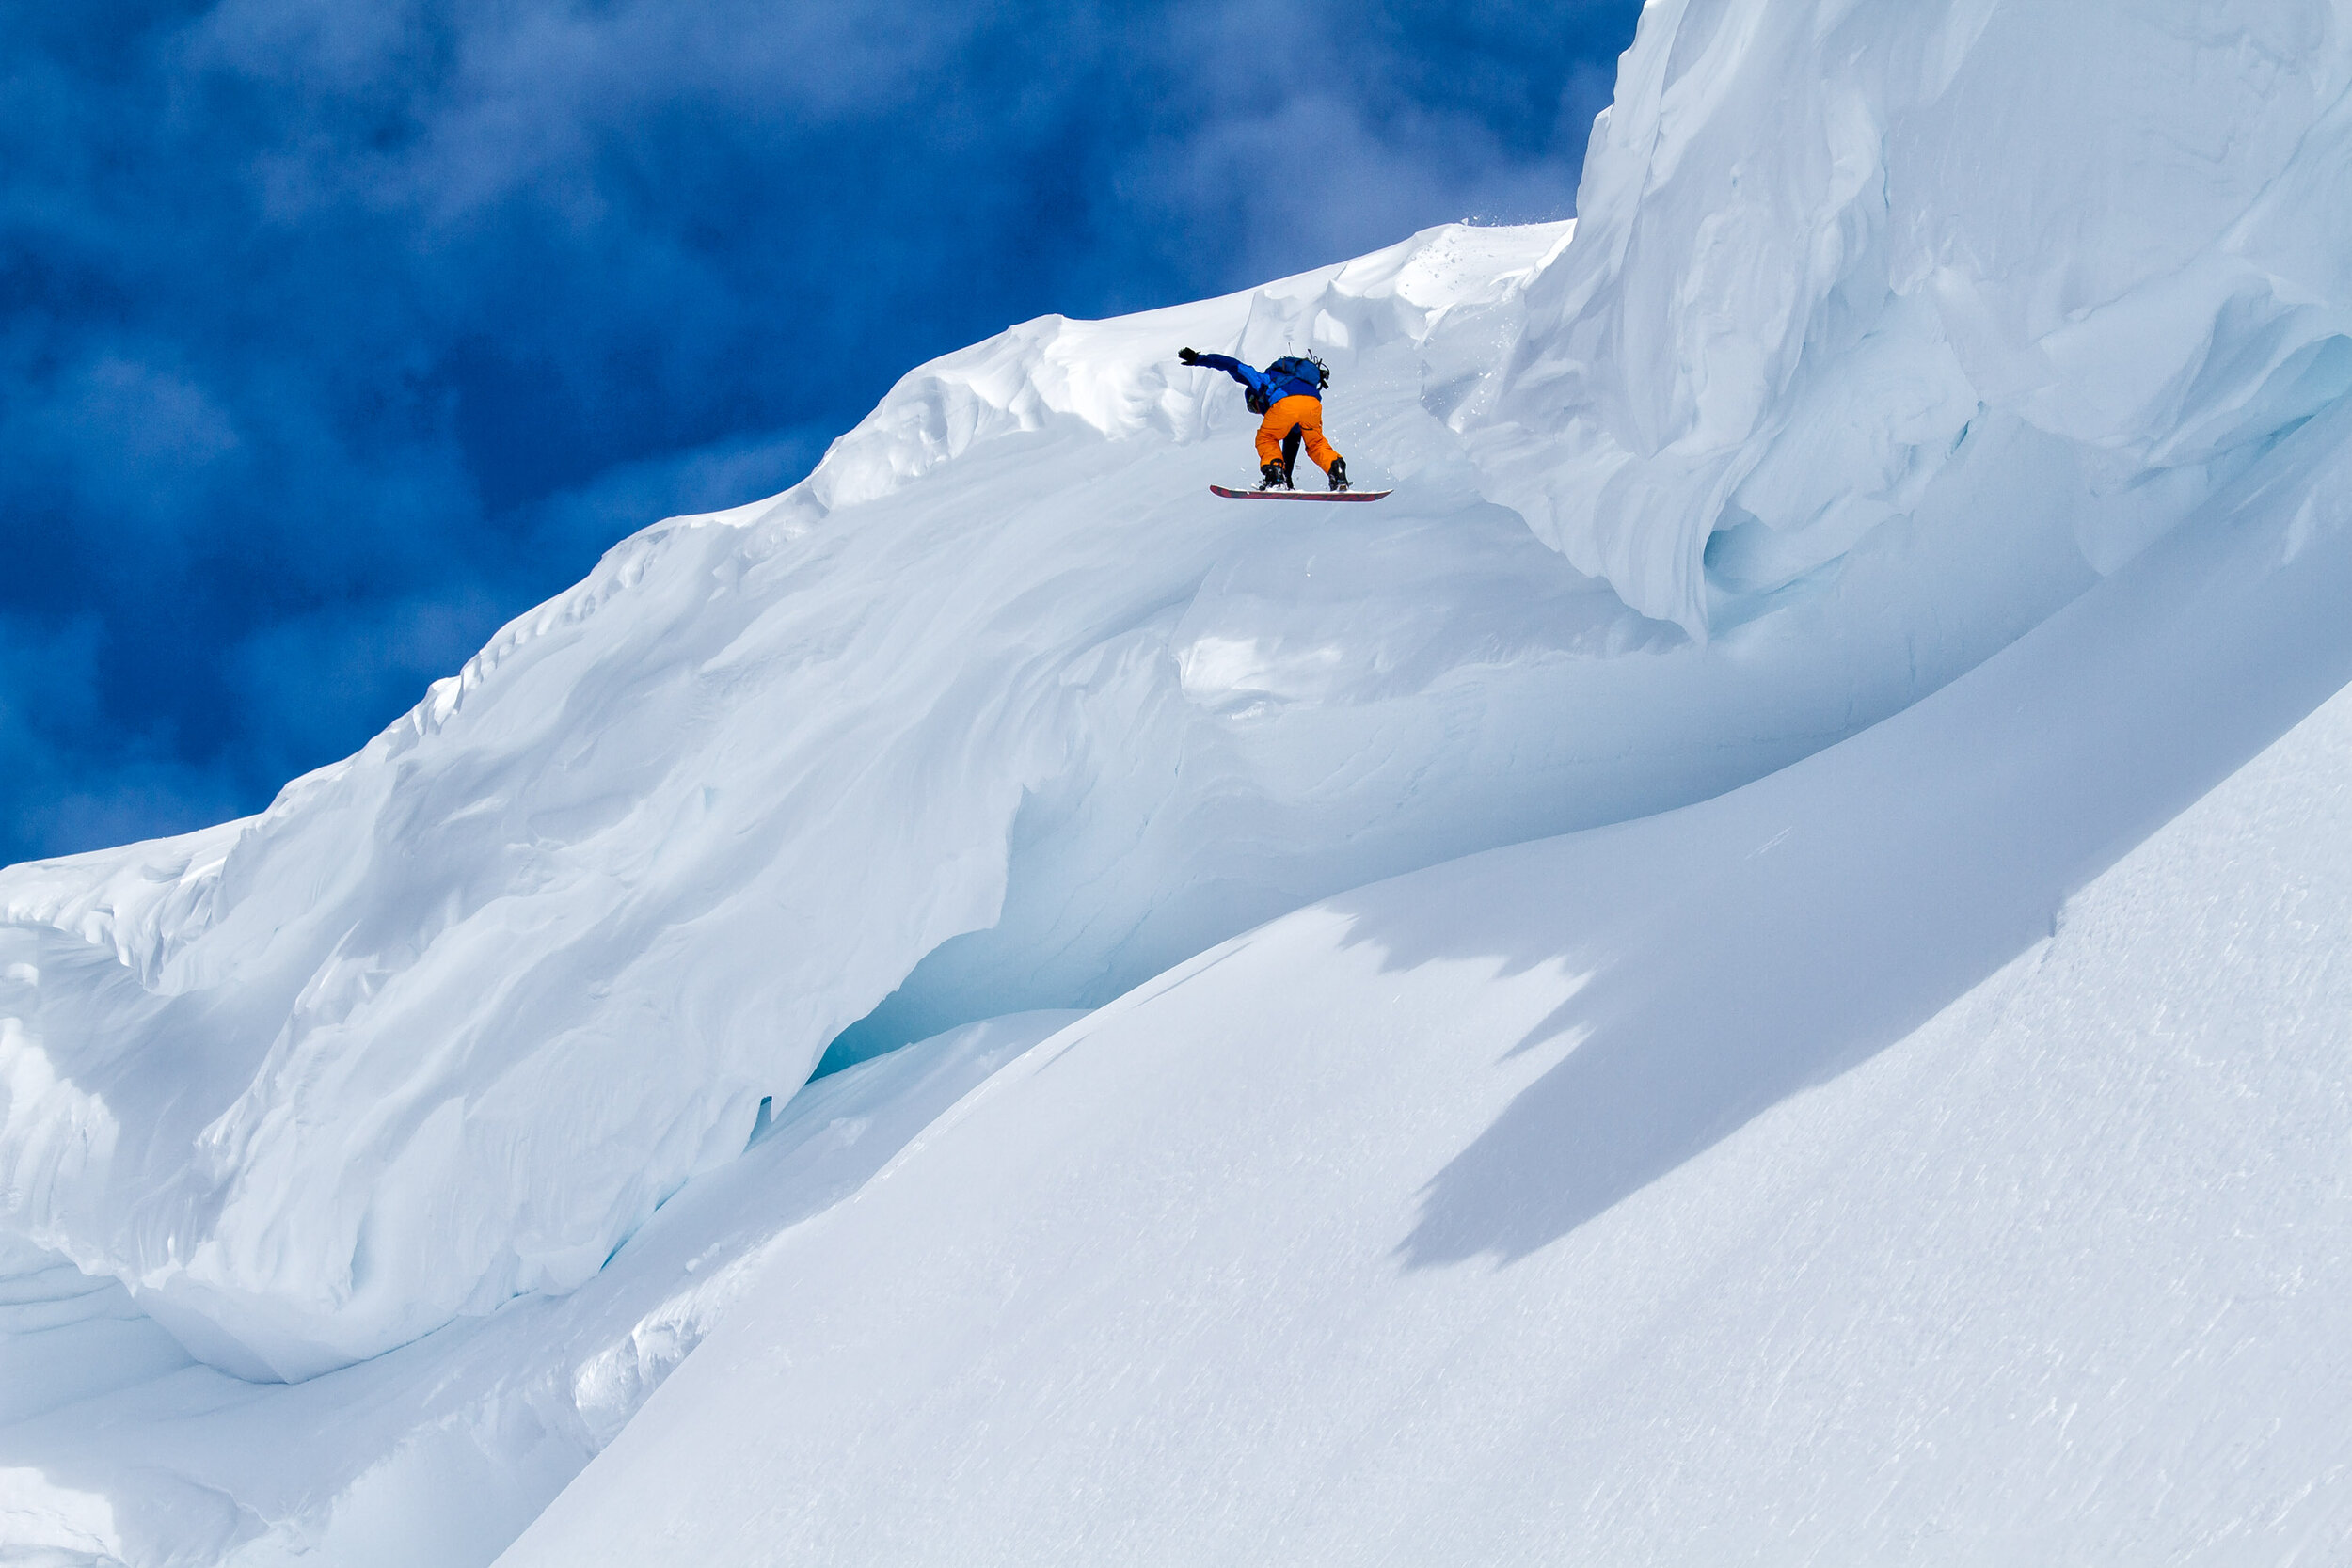  Adventure: Shawn Freyer drops off a huge cornice while snowboarding in the Mt. Baker backcountry, Mt. Baker Wilderness 